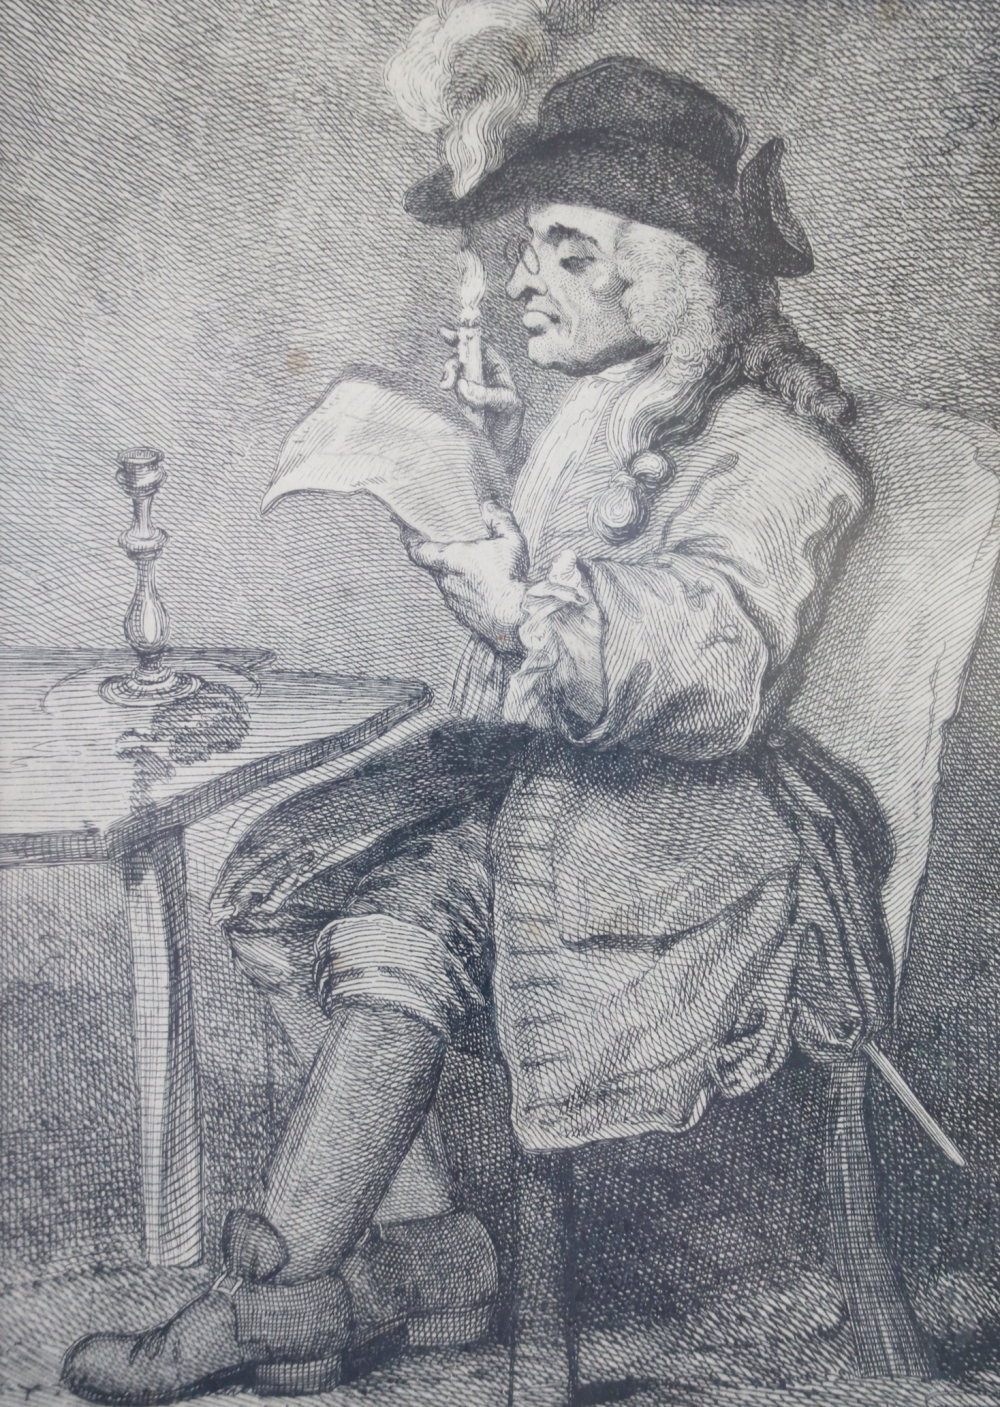 William Hogarth: 18th century engraving, "The Politician", man reading by candlelight, 5 1/4" x 3